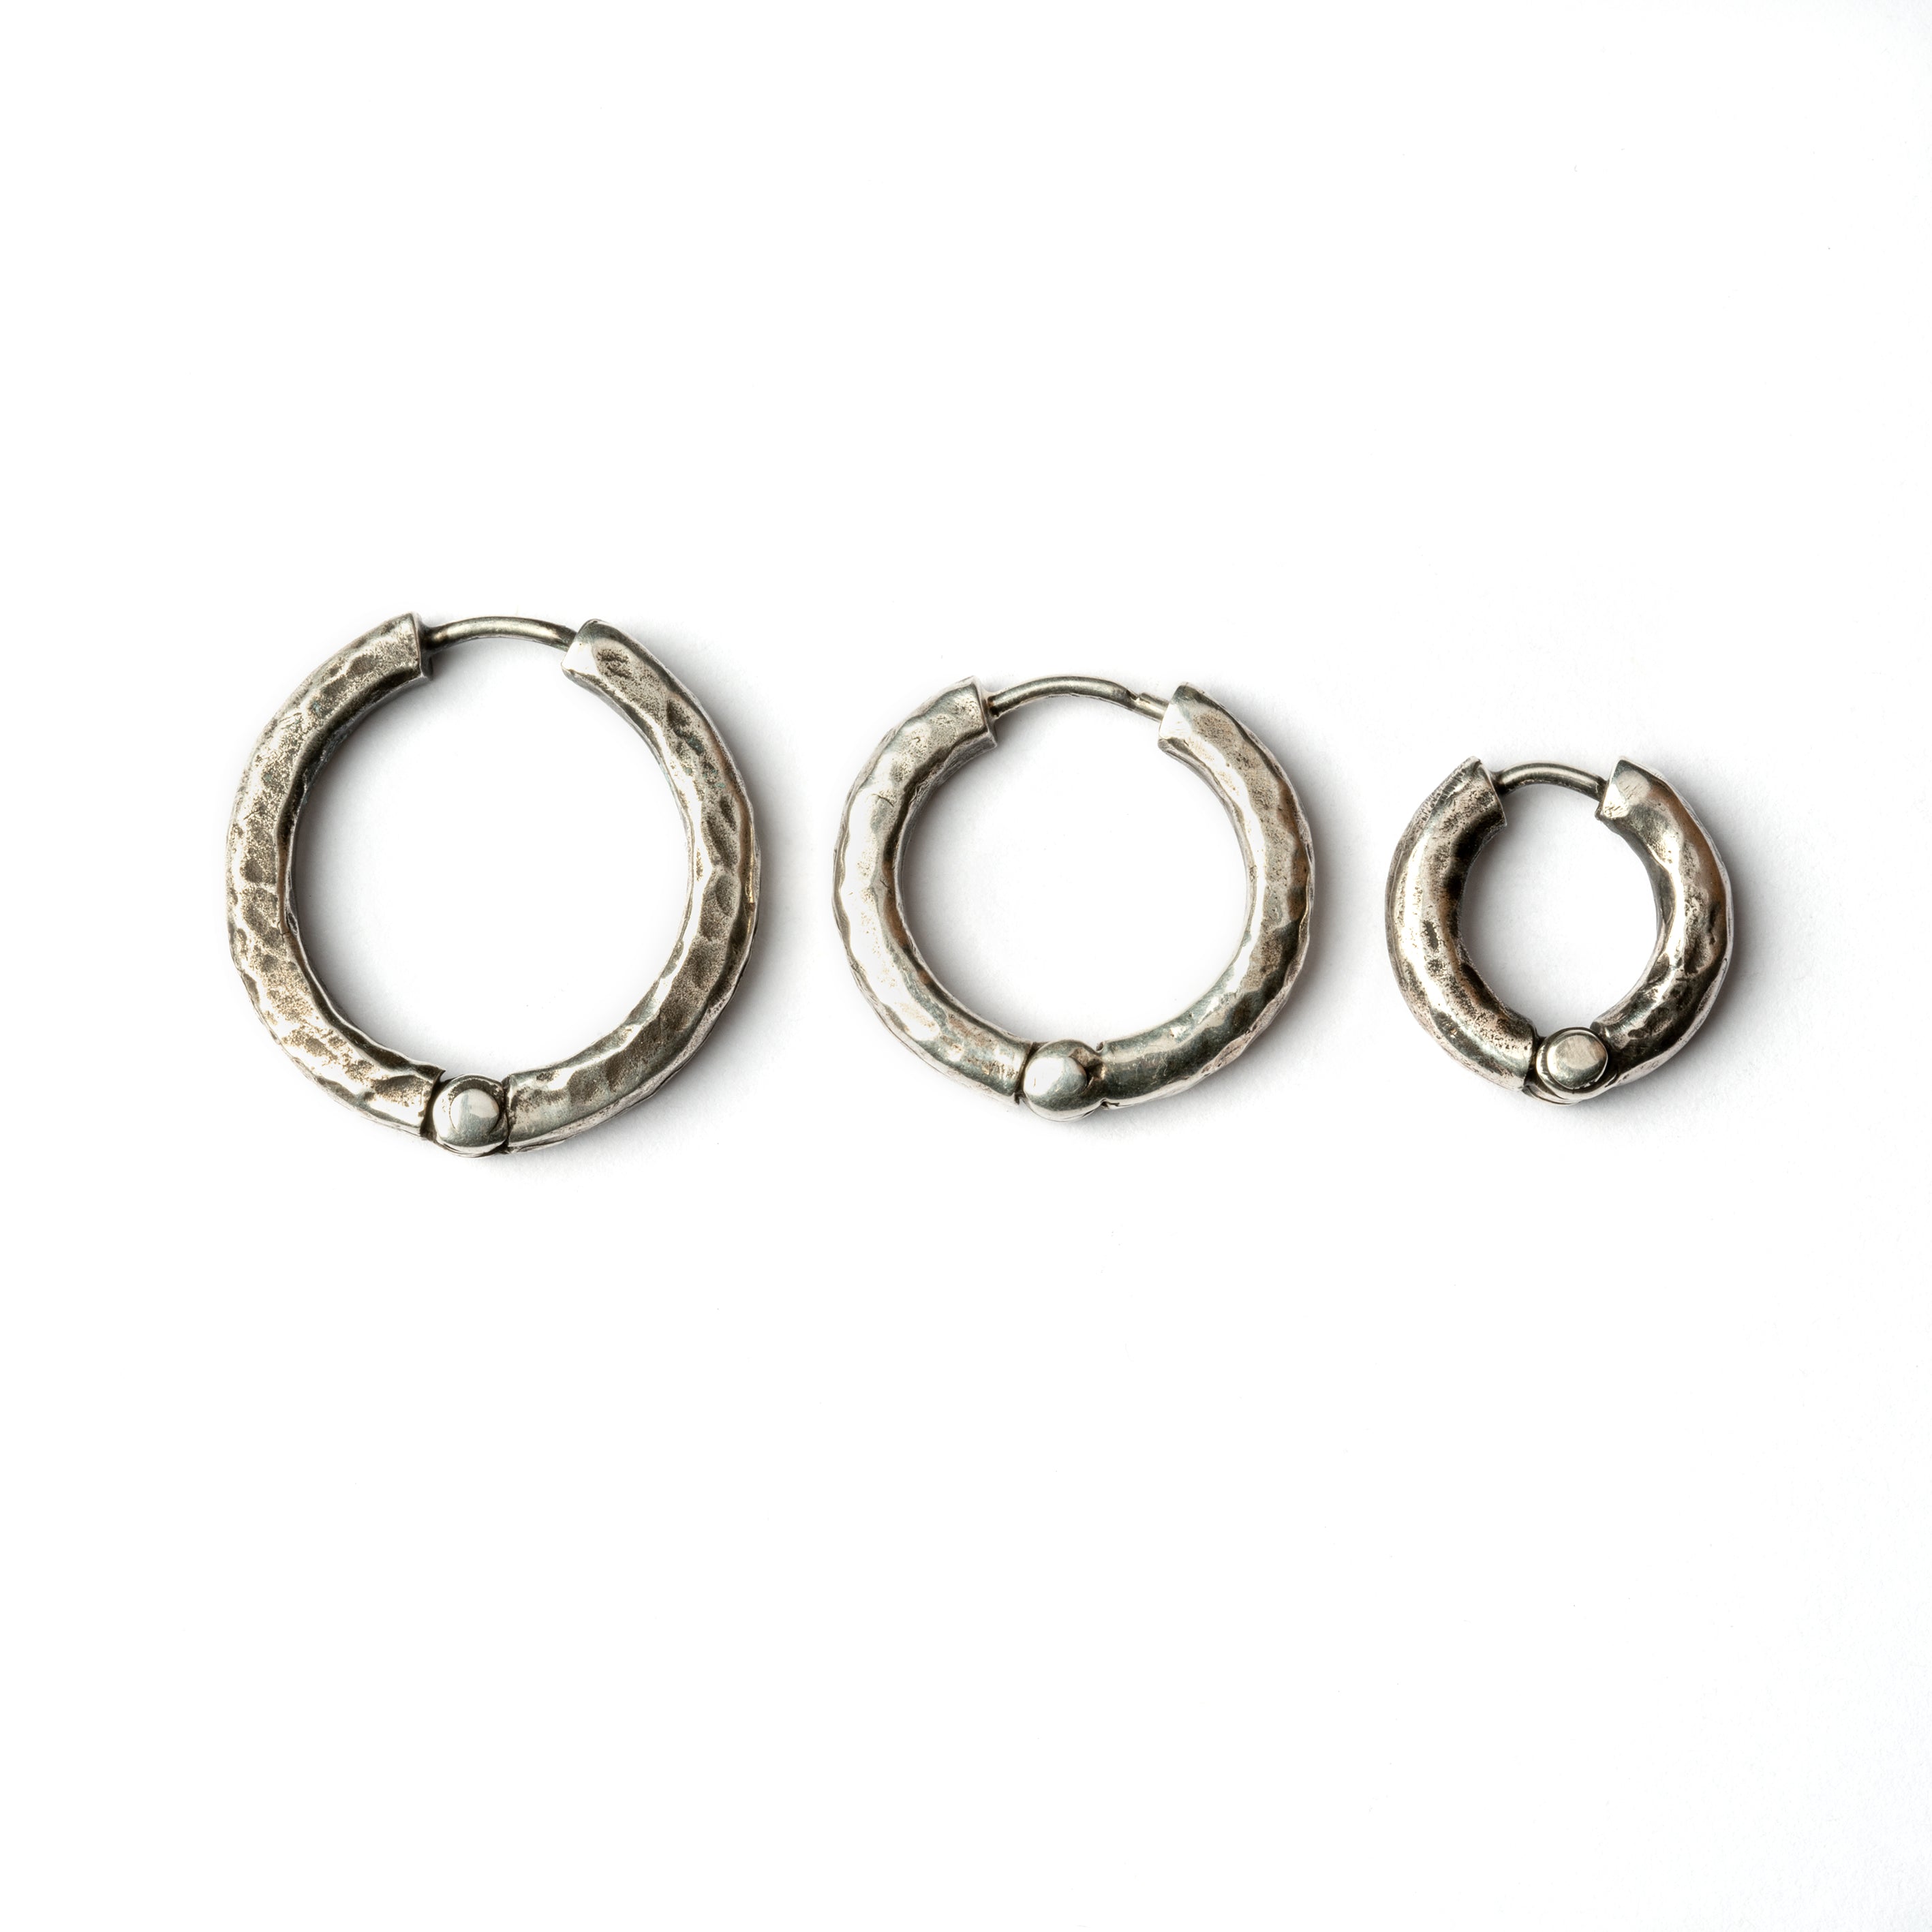 hammered oxidised silver hoop earrings with click on locking system 26mm, 22mm, 18mm front view